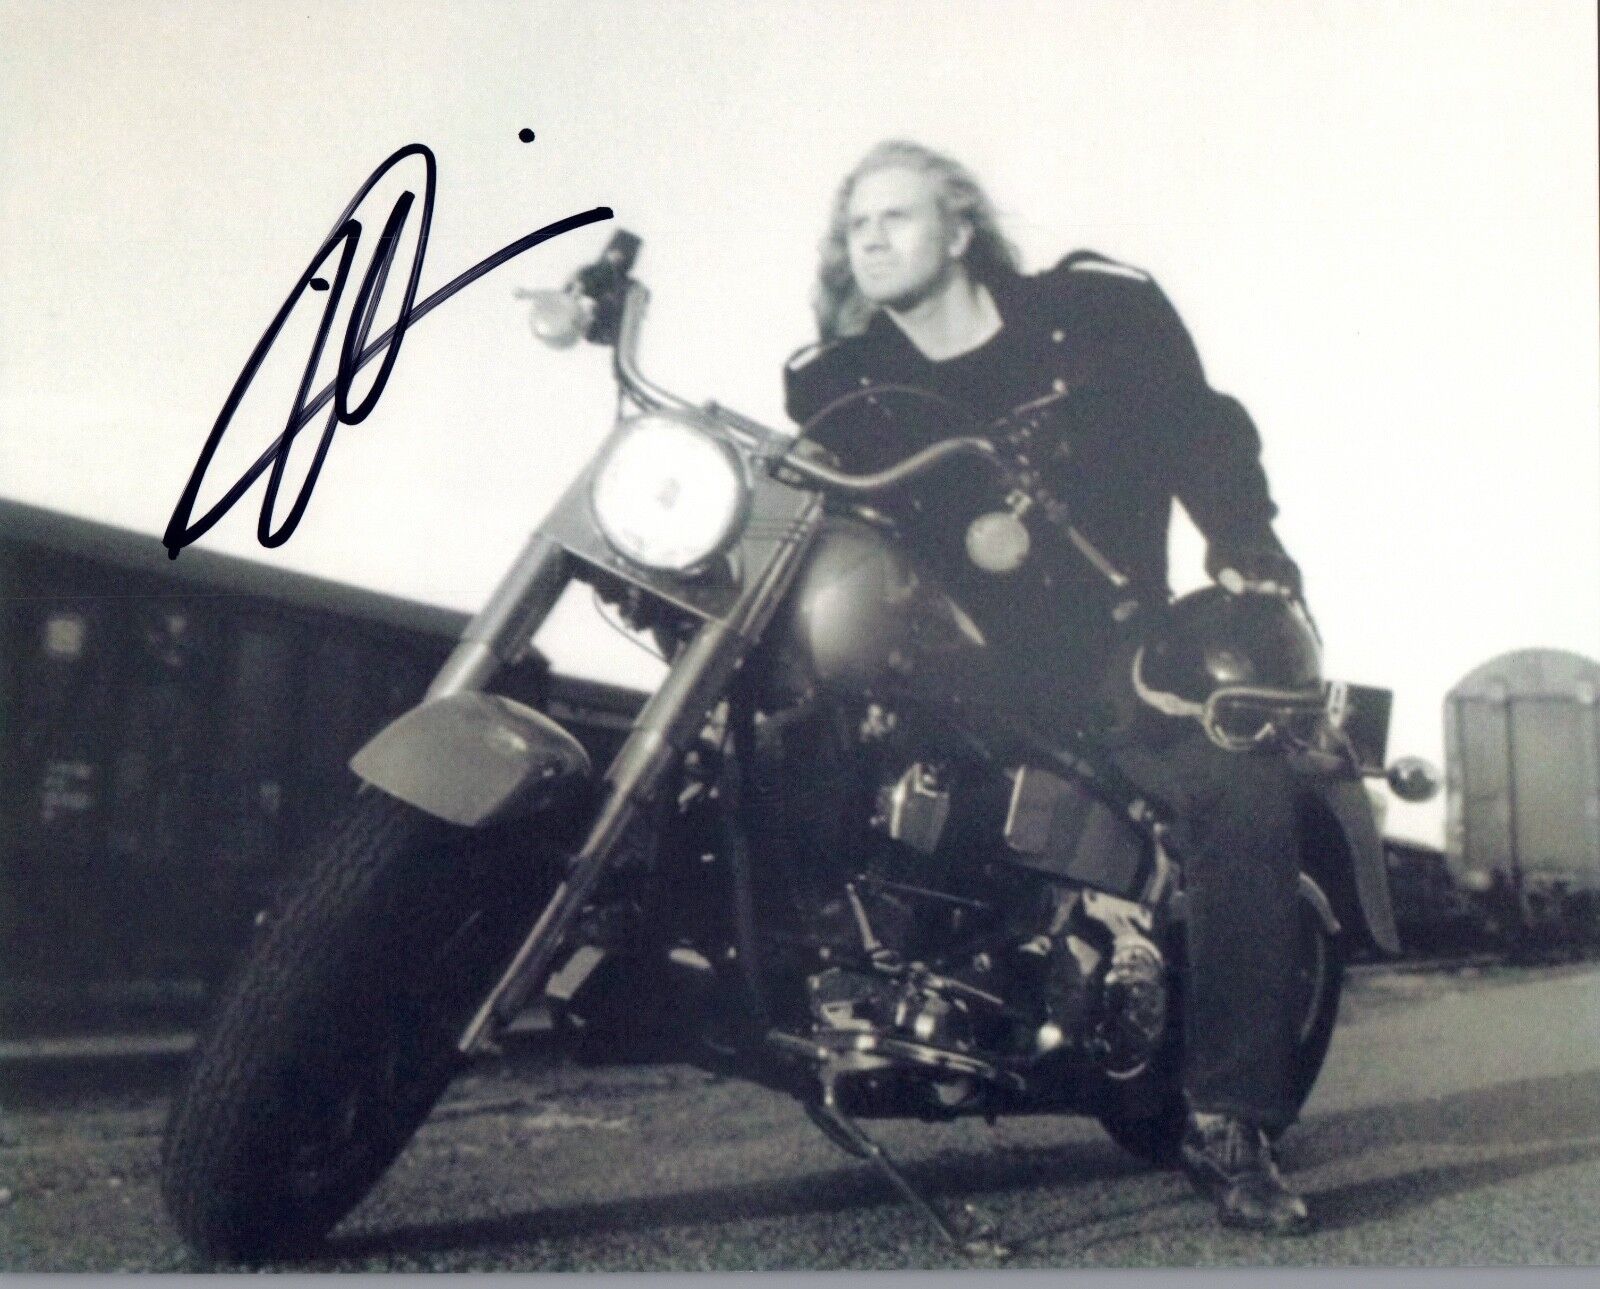 Harley Wallen Signed Autograph 8x10 Photo Poster painting BETRAYED & MOVING PARTS Actor COA